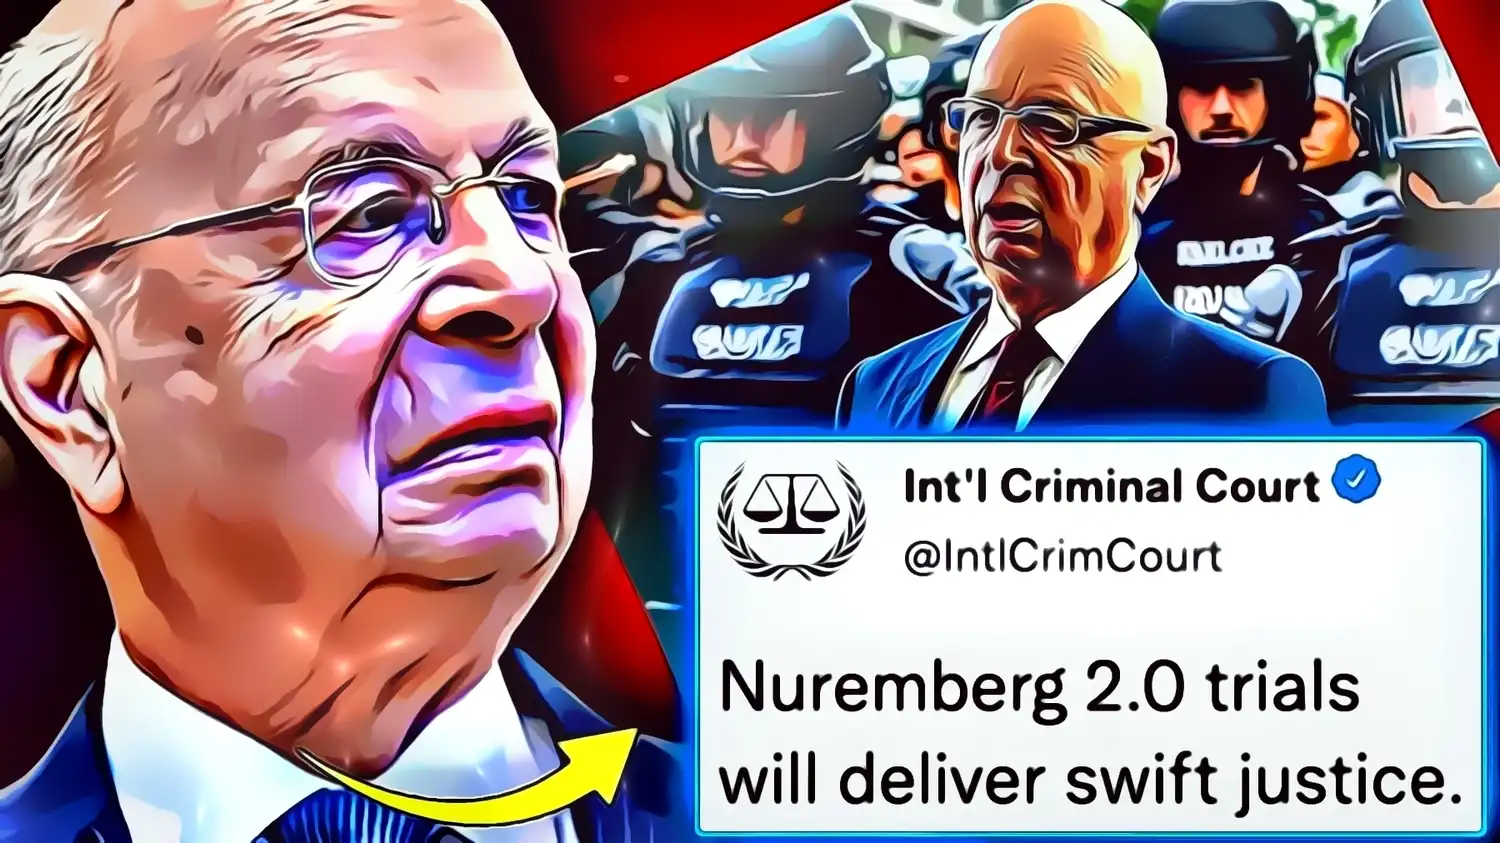 WEF Insider: Klaus Schwab faces the death penalty for "crimes against humanity".